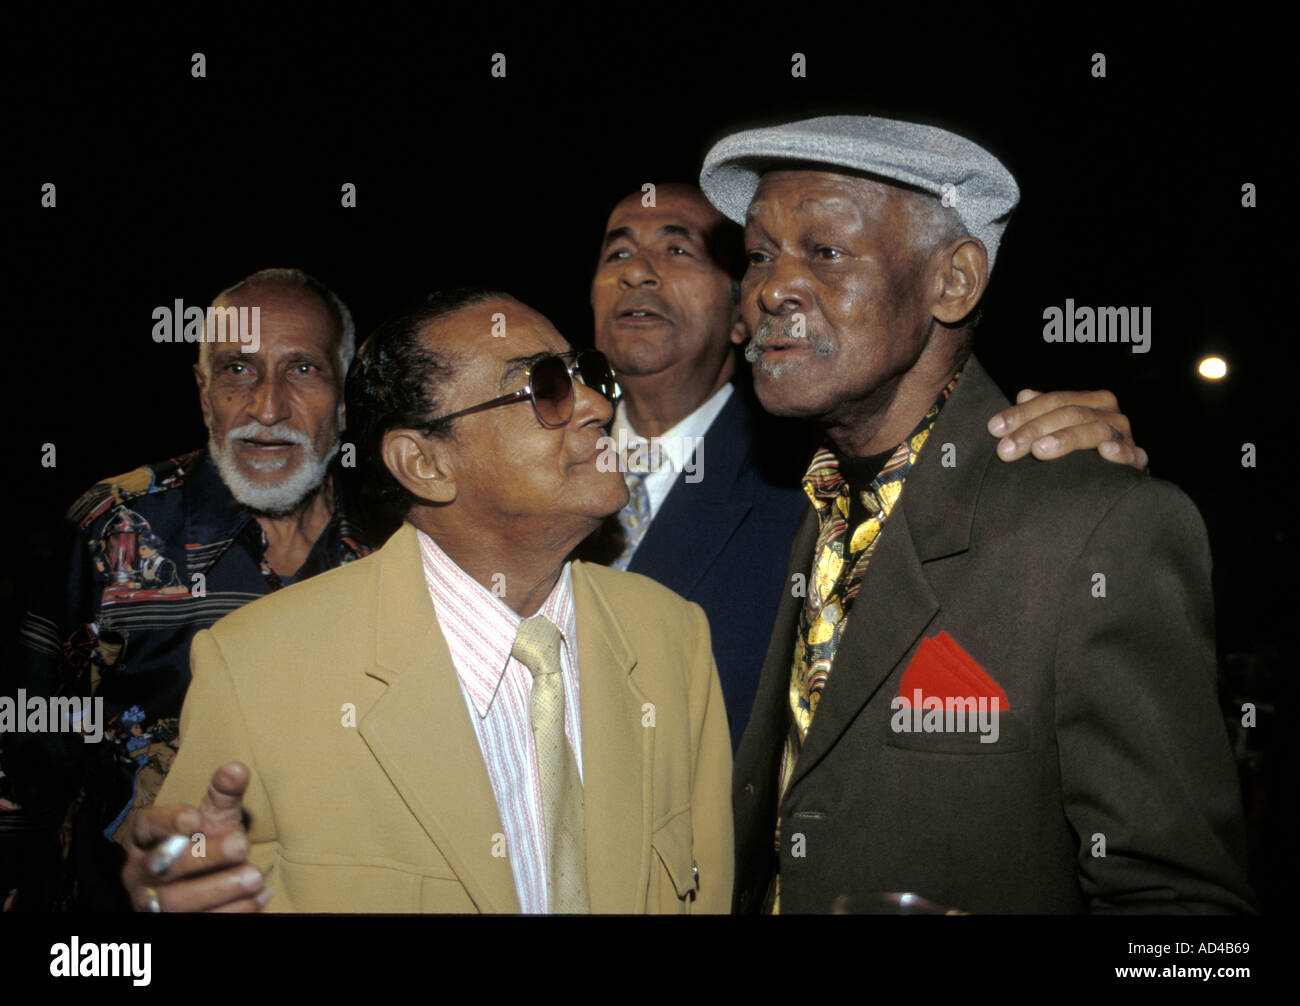 IBRAHIM FERRER, LATE LEAD SINGER OF THE BUENA VISTA SOCIAL CLUB WITH THE LATE PUNTILLITA RUBEN GONZALES AND CACHAO HAVANA CUBA Stock Photo